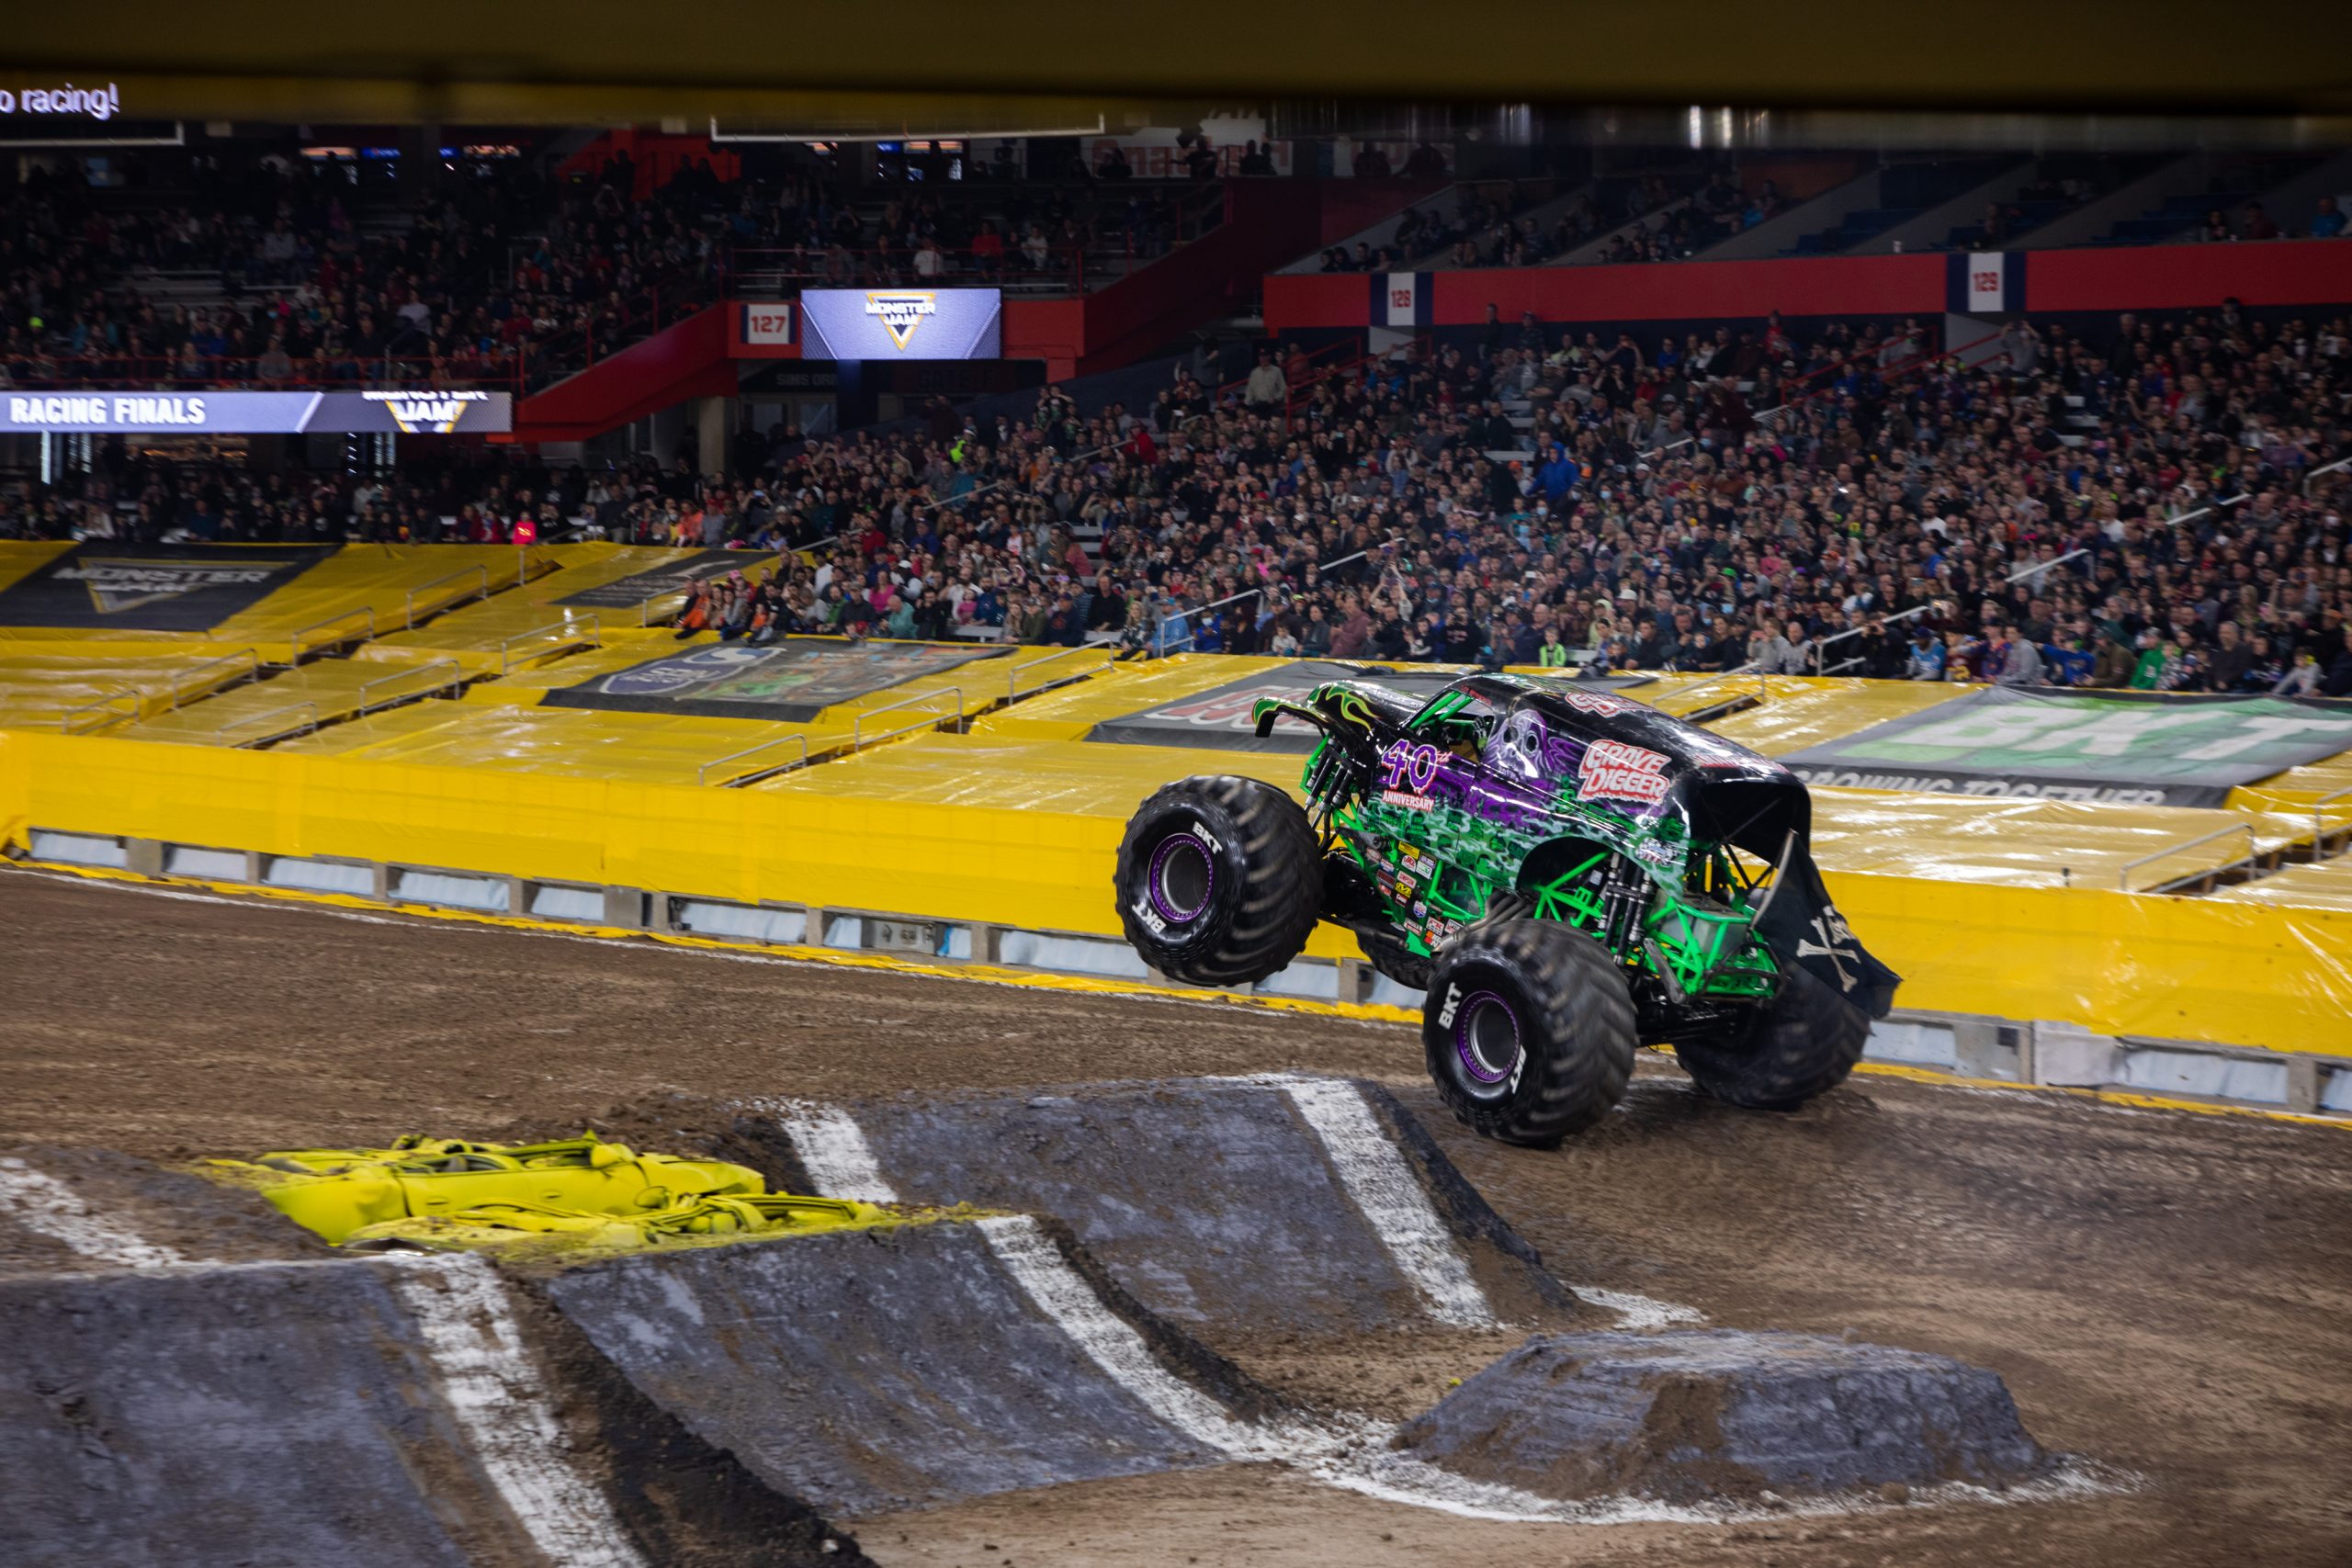 The monster truck "Grave Digger" launches into the air at Monster Jam Saturday Night in The Dome.